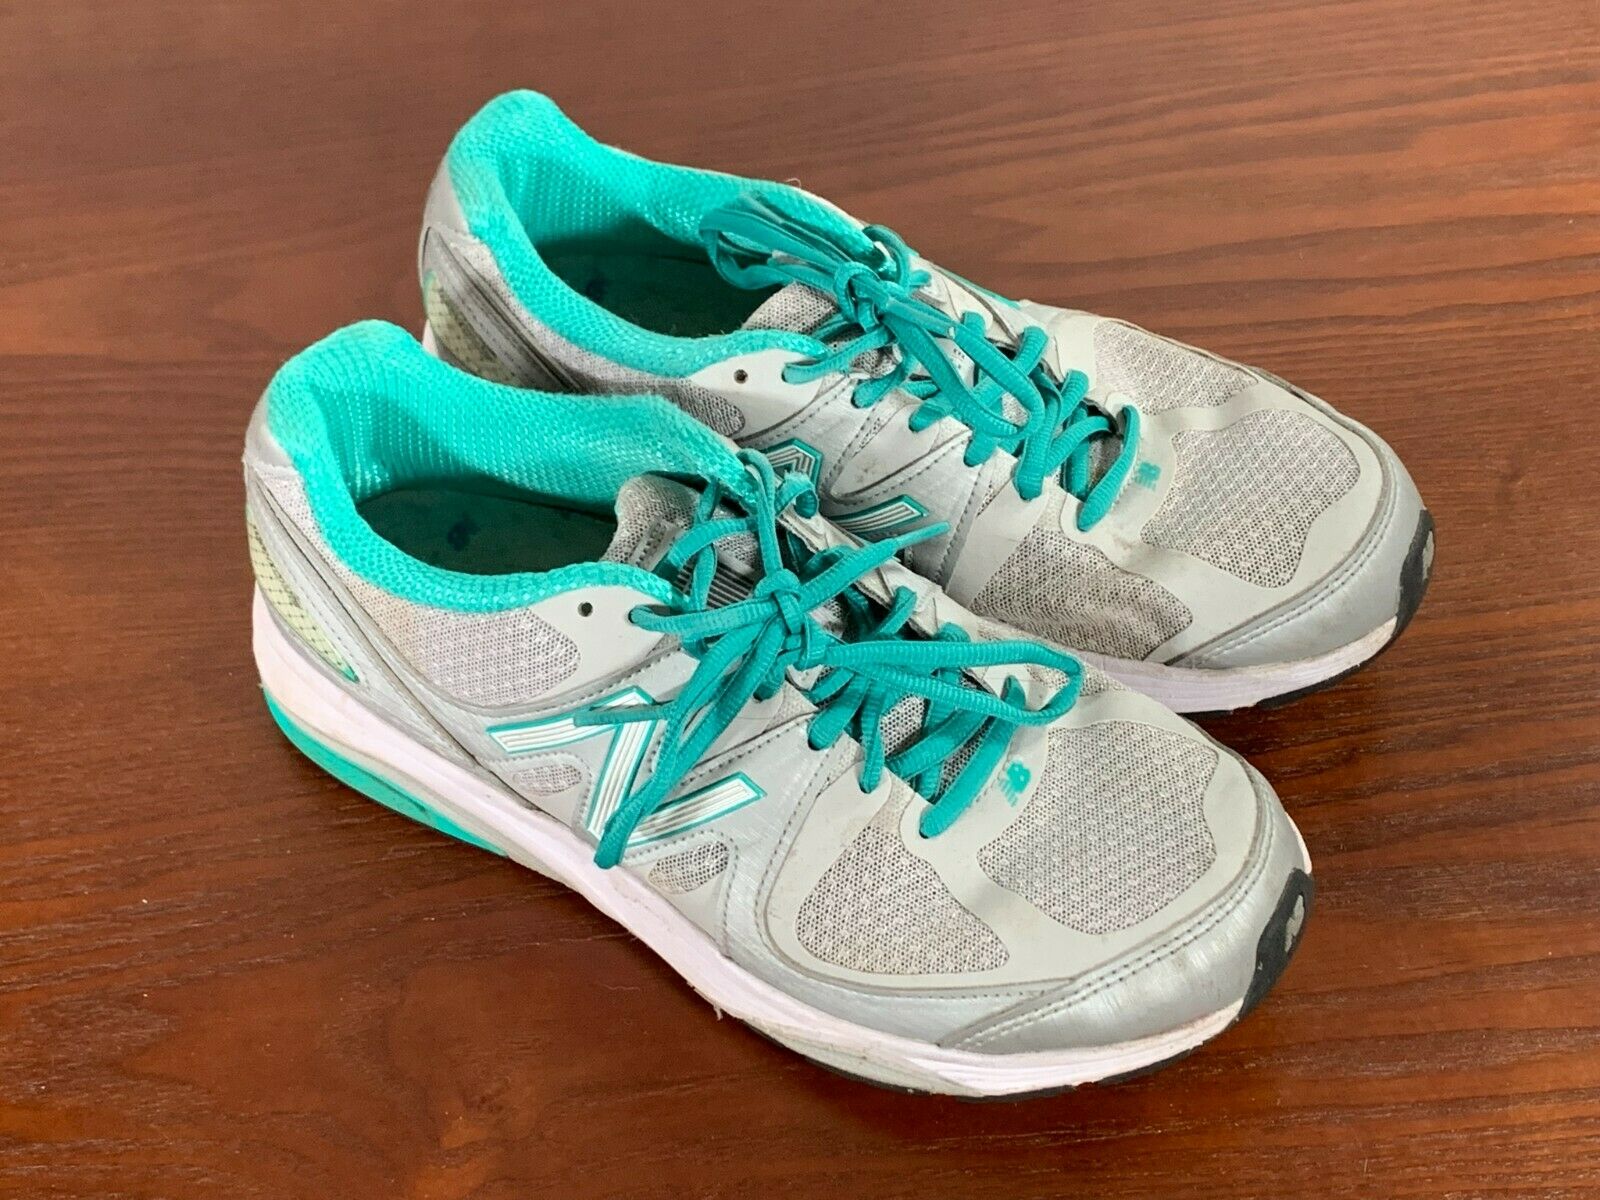 Womens 9 D New Balance Motion Control Running Shoes Gray Teal W1540SG2